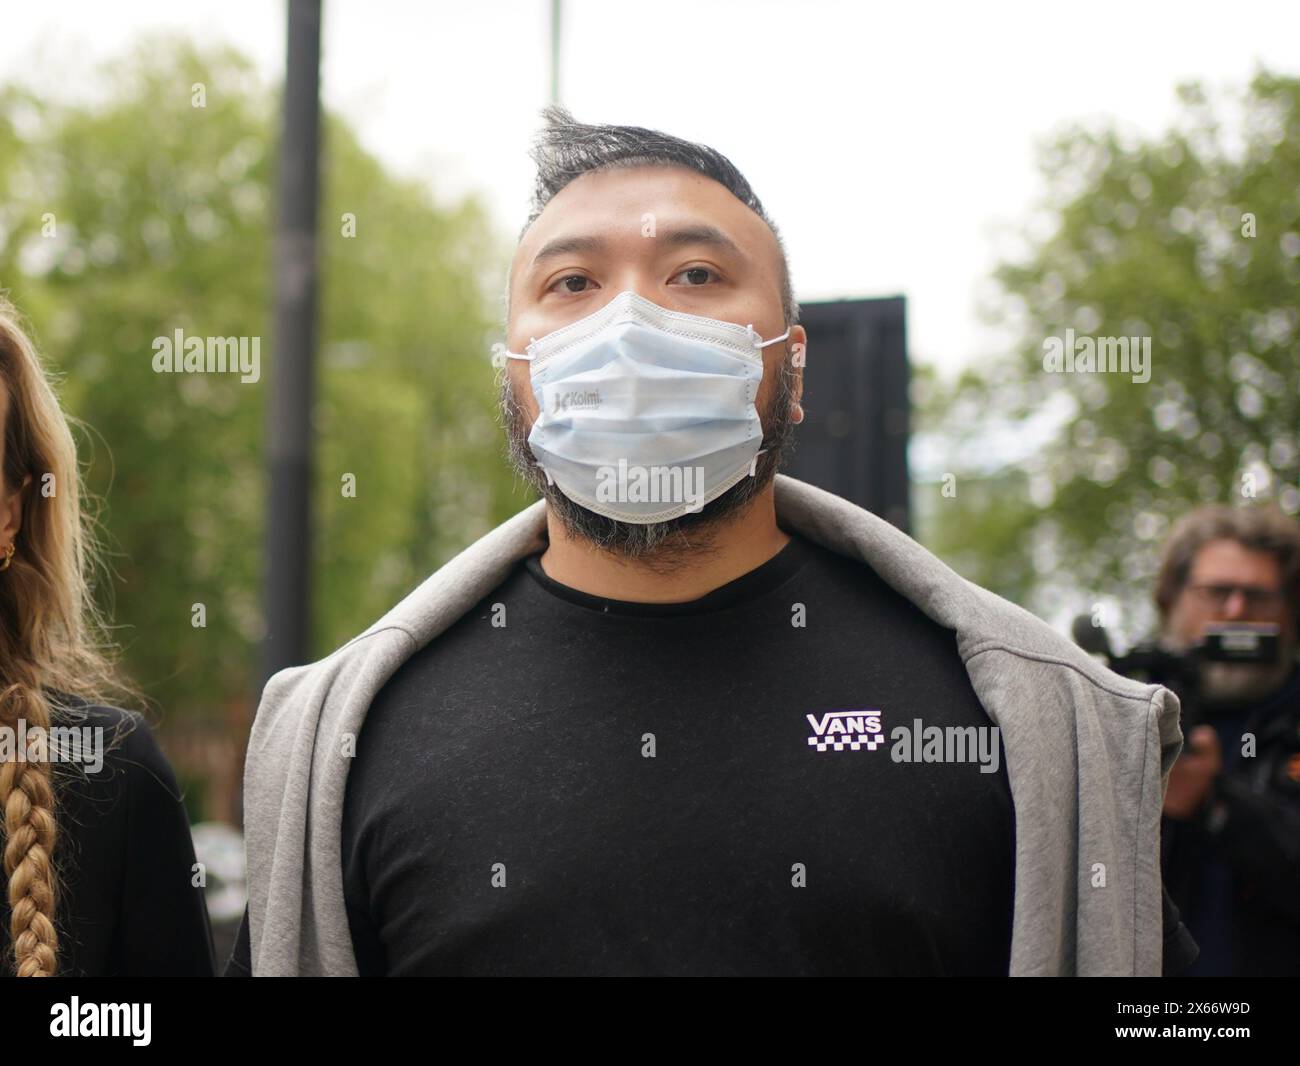 Chi Leung Wai leaves Westminster Magistrates' Court, central London, where he was freed on bail after appearing charged under the National Security Act of assisting a foreign intelligence service in Hong Kong. Chi Leung (Peter) Wai, 38, of Staines-upon-Thames, Matthew Trickett, 37, of Maidenhead, and Chung Biu Yuen, 63, of Hackney, have each been charged with assisting a foreign intelligence service, contrary to section 3(1) and (9) of the National Security Act 2023. They have also each been charged with foreign interference, contrary to section 13(2) and (7) of the National Security Act 2023. Stock Photo